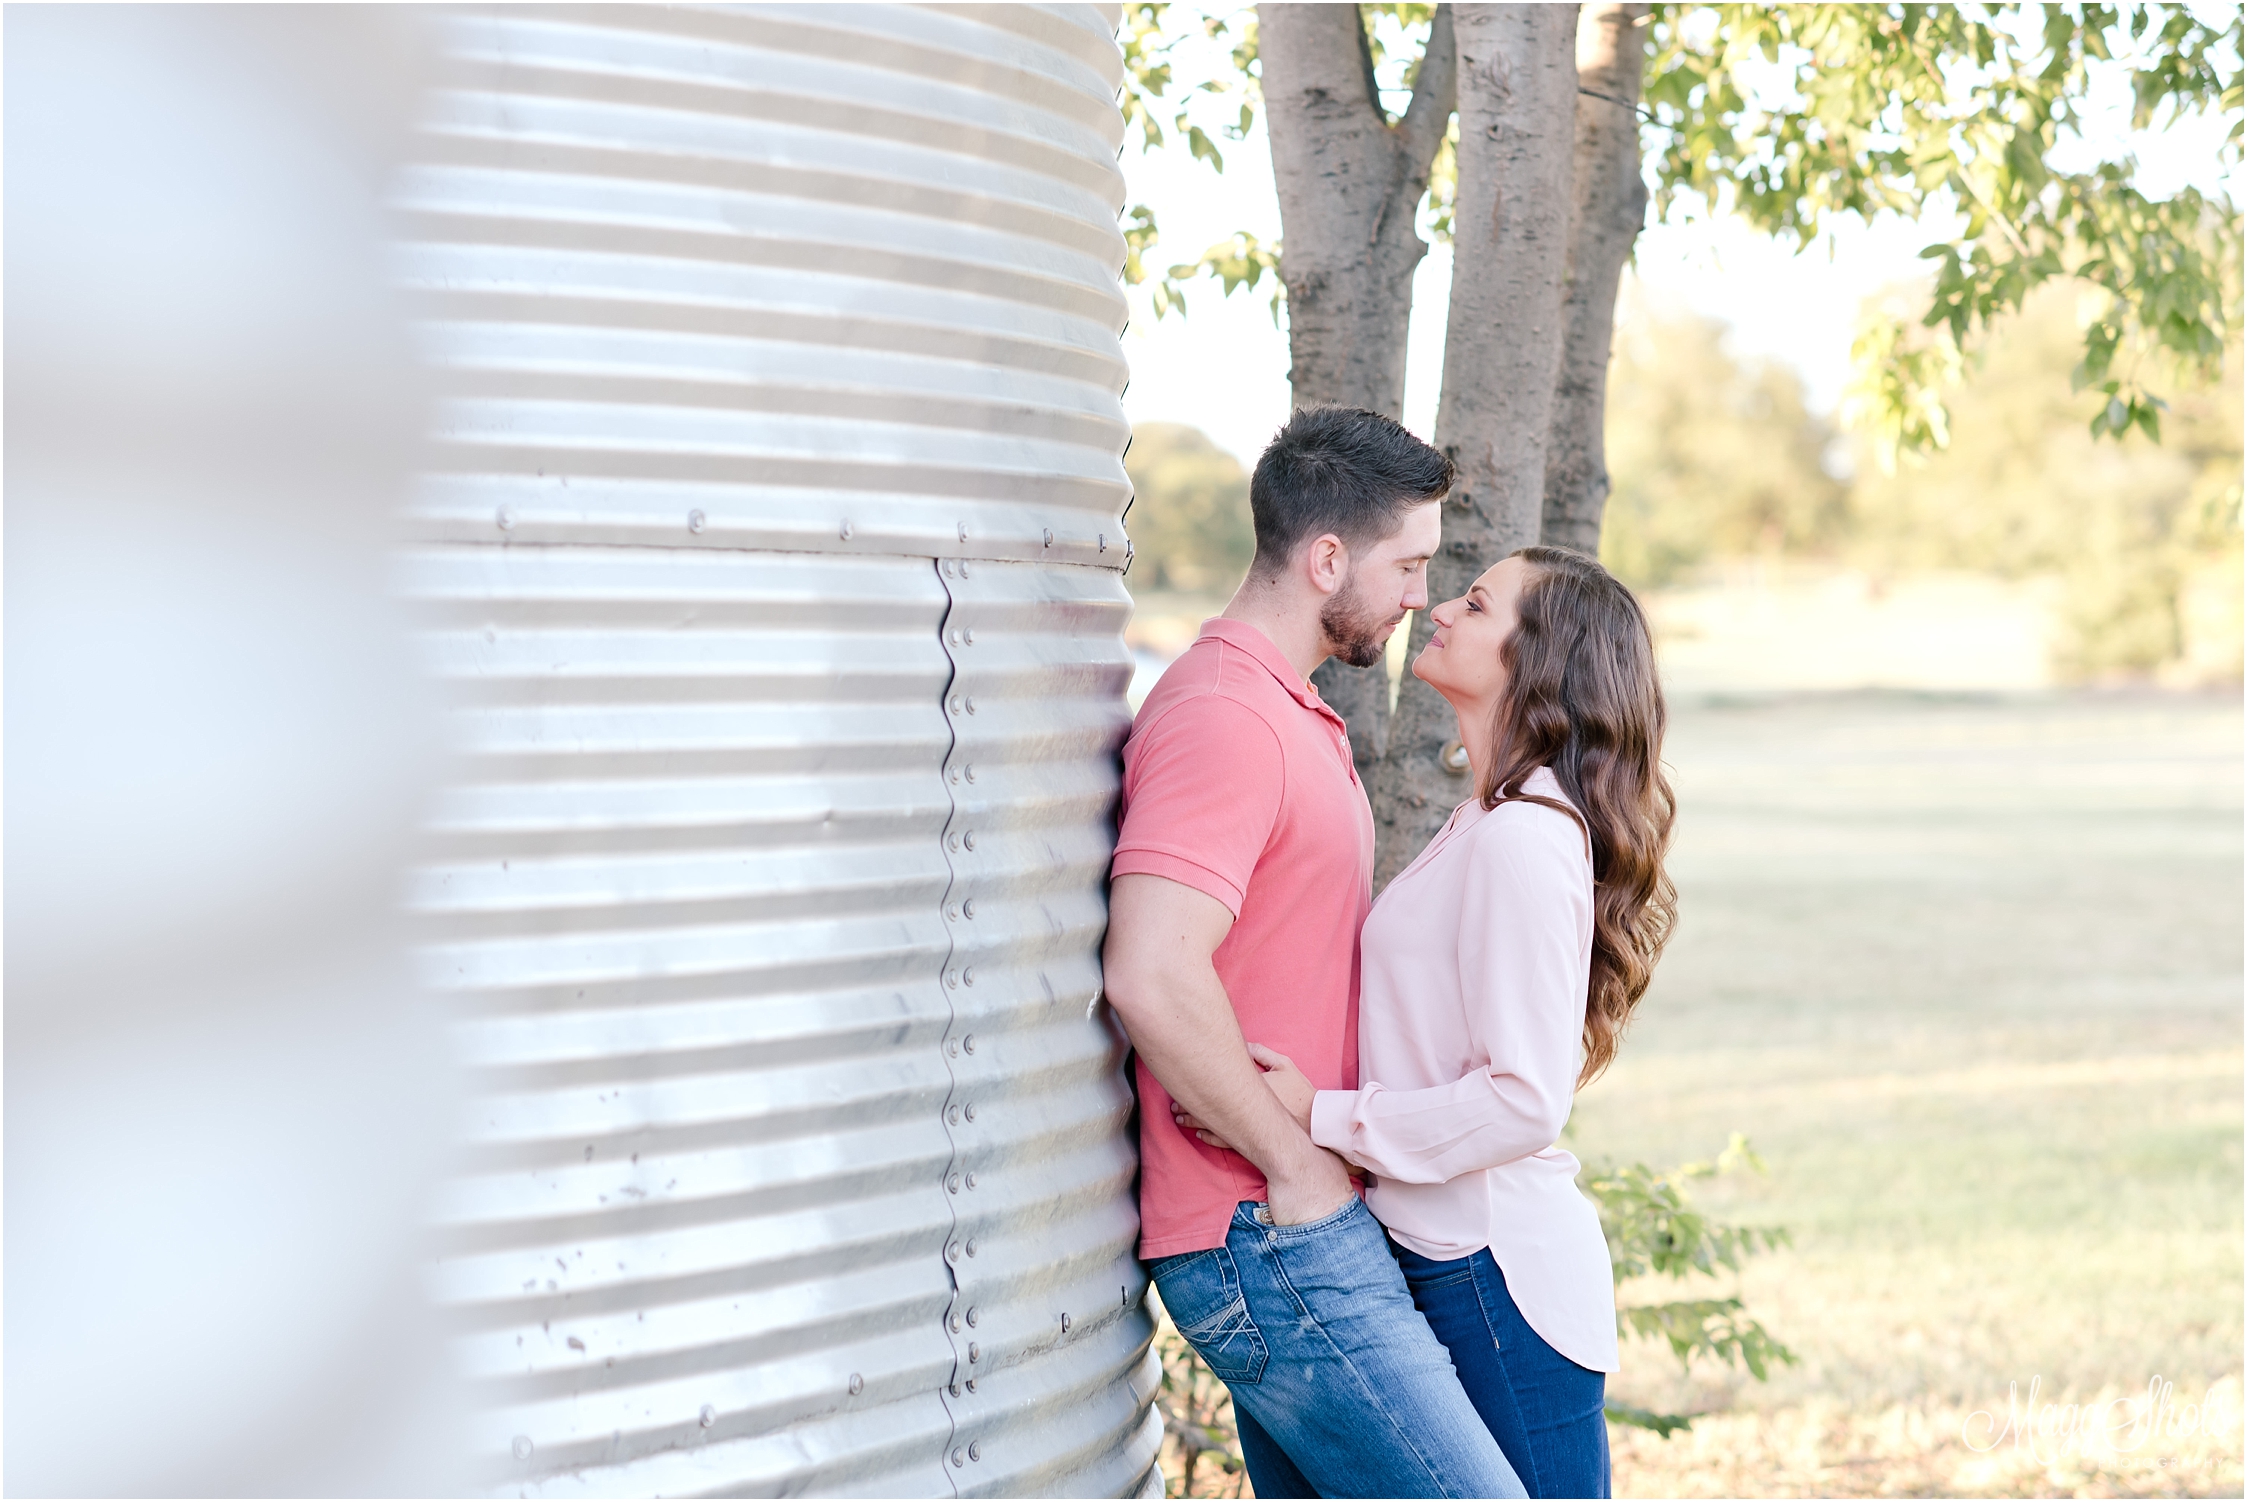 Engagement Session, Paige and Ian, Love, Green Acres Park, Engagement, Bride and Groom, MaggShots Photography, MaggShots, Professional Photography, Professional Photographer, DFW Photographer, Wedding Photographer, Destination Photographer, Silos